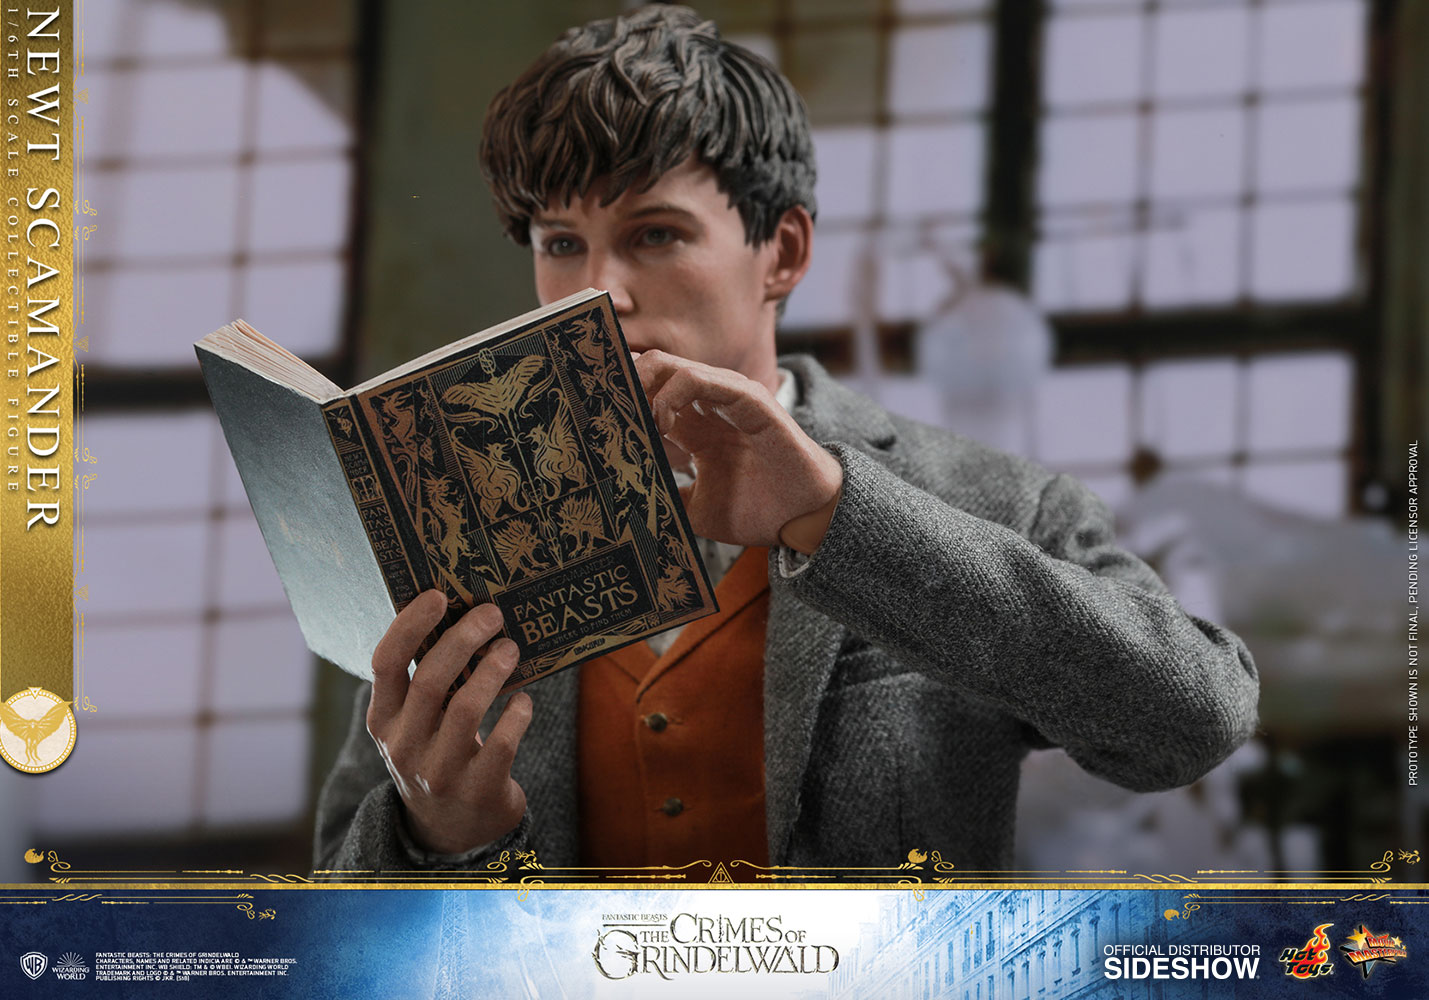 Newt Scamander Sixth Scale Figure by Hot Toys Movie Masterpiece Series